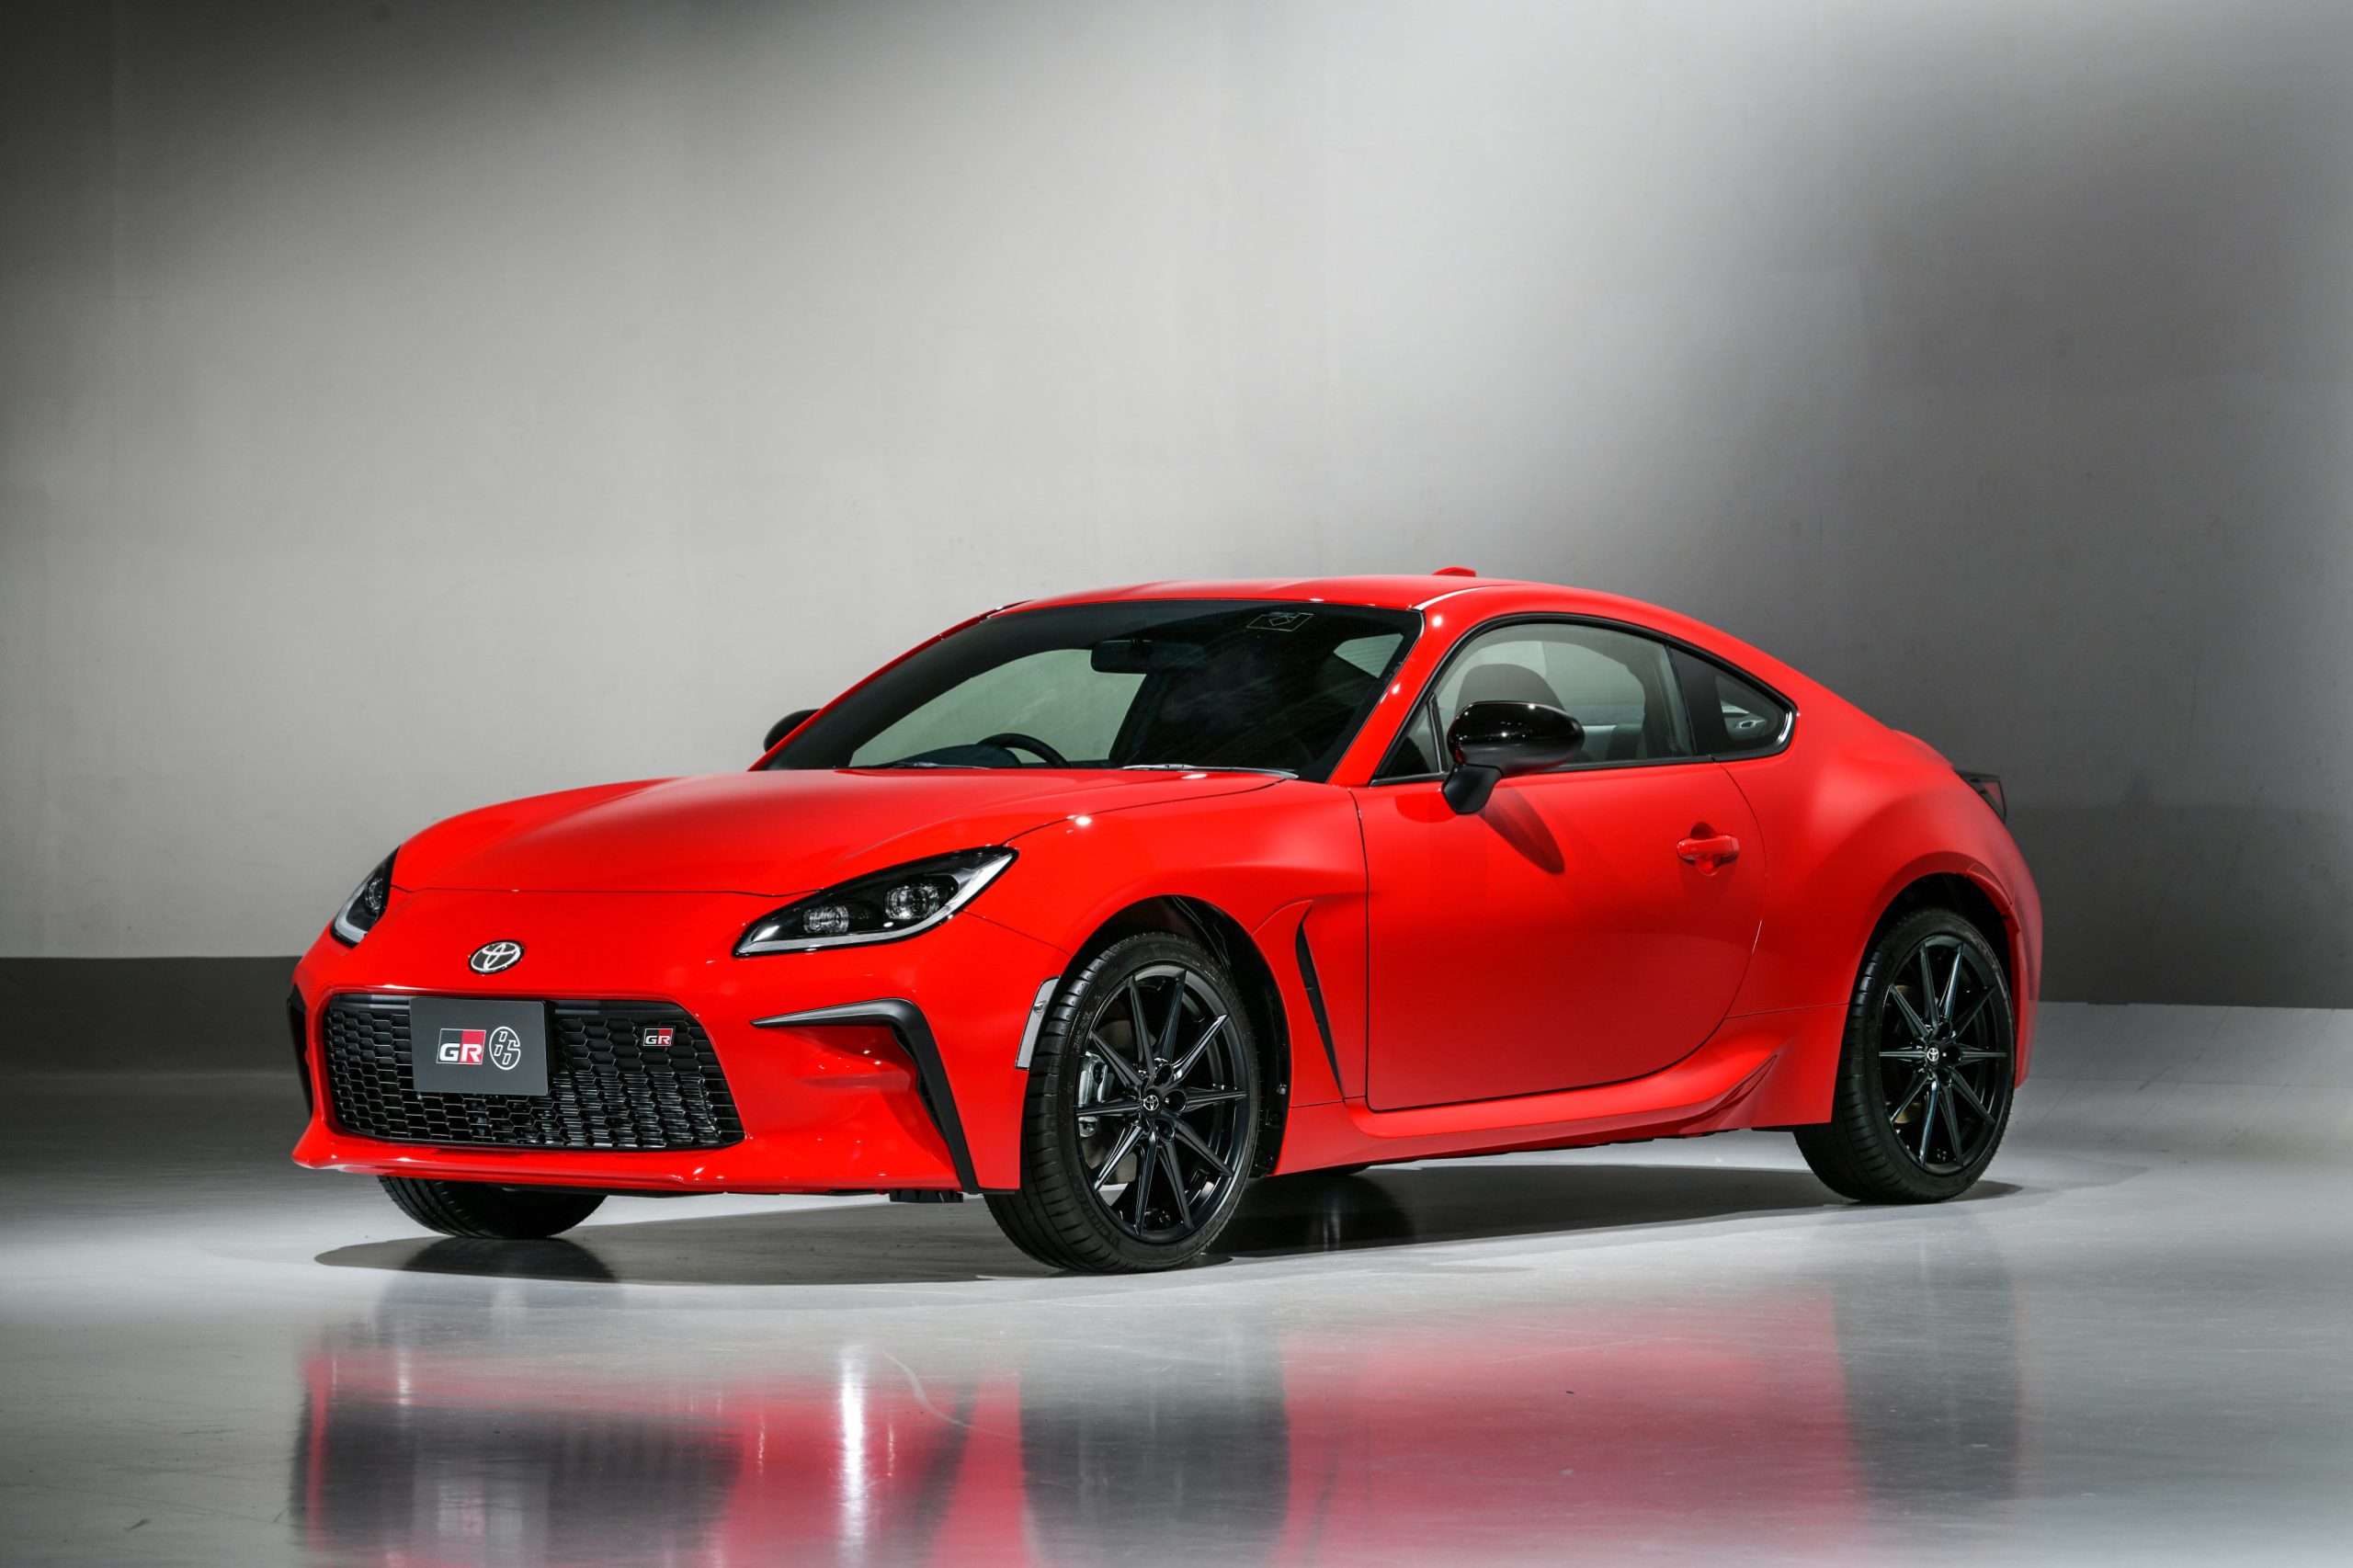 The all-new Toyota GR 86 makes its online debut